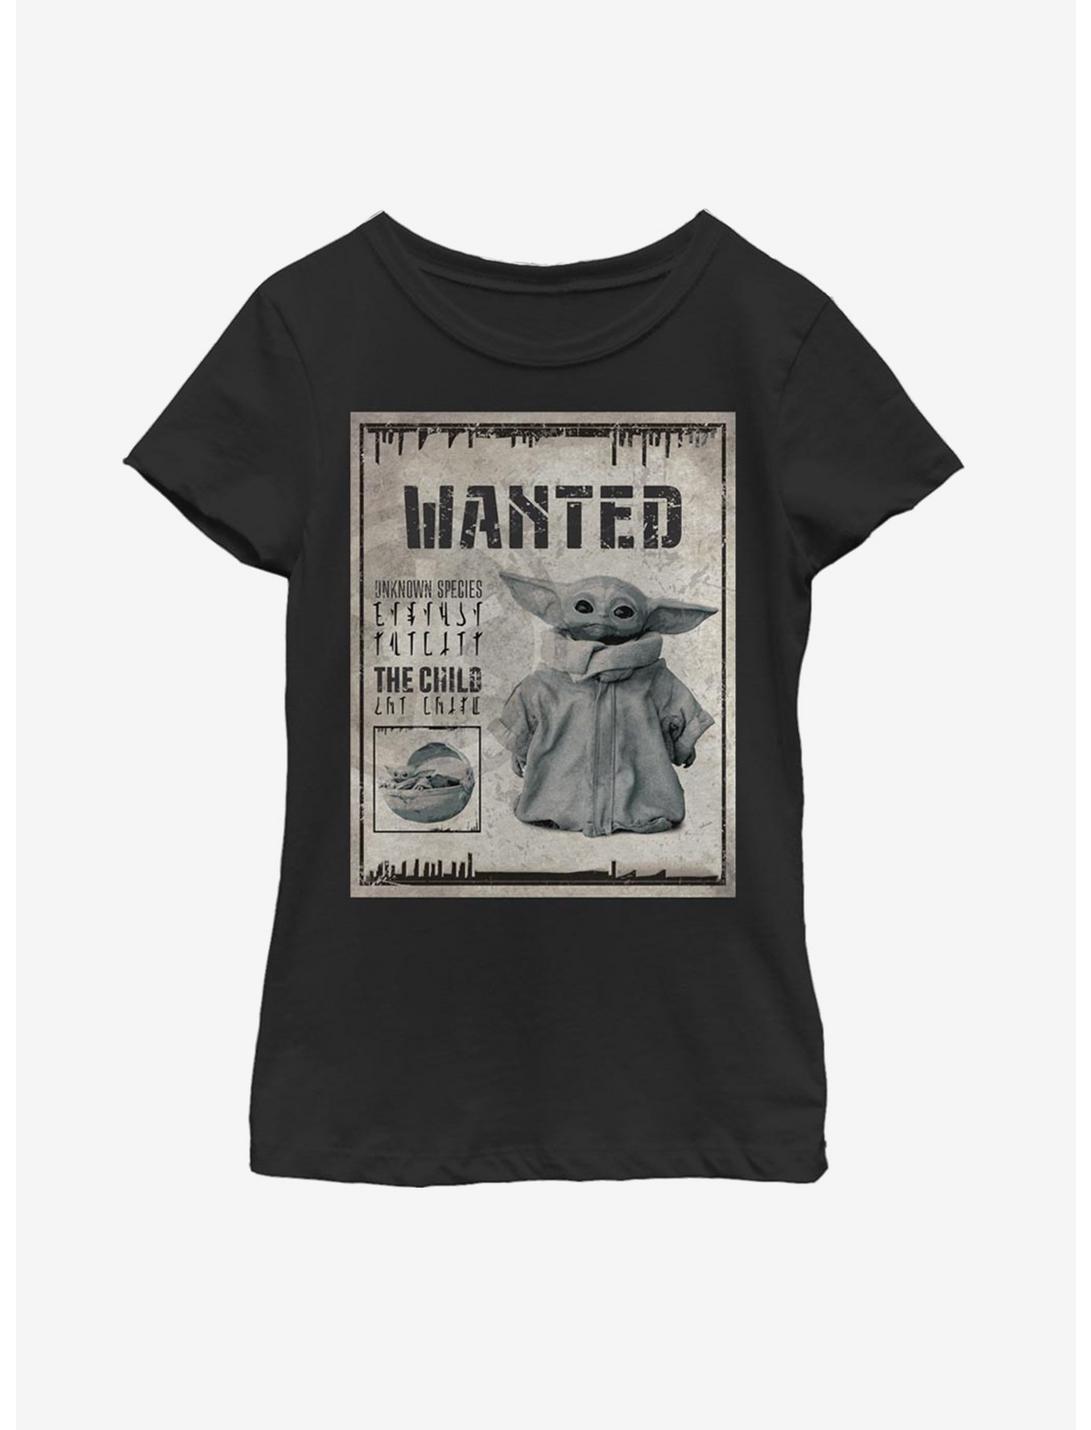 Star Wars The Mandalorian The Child Unknown Wanted Poster Youth Girls T-Shirt, BLACK, hi-res